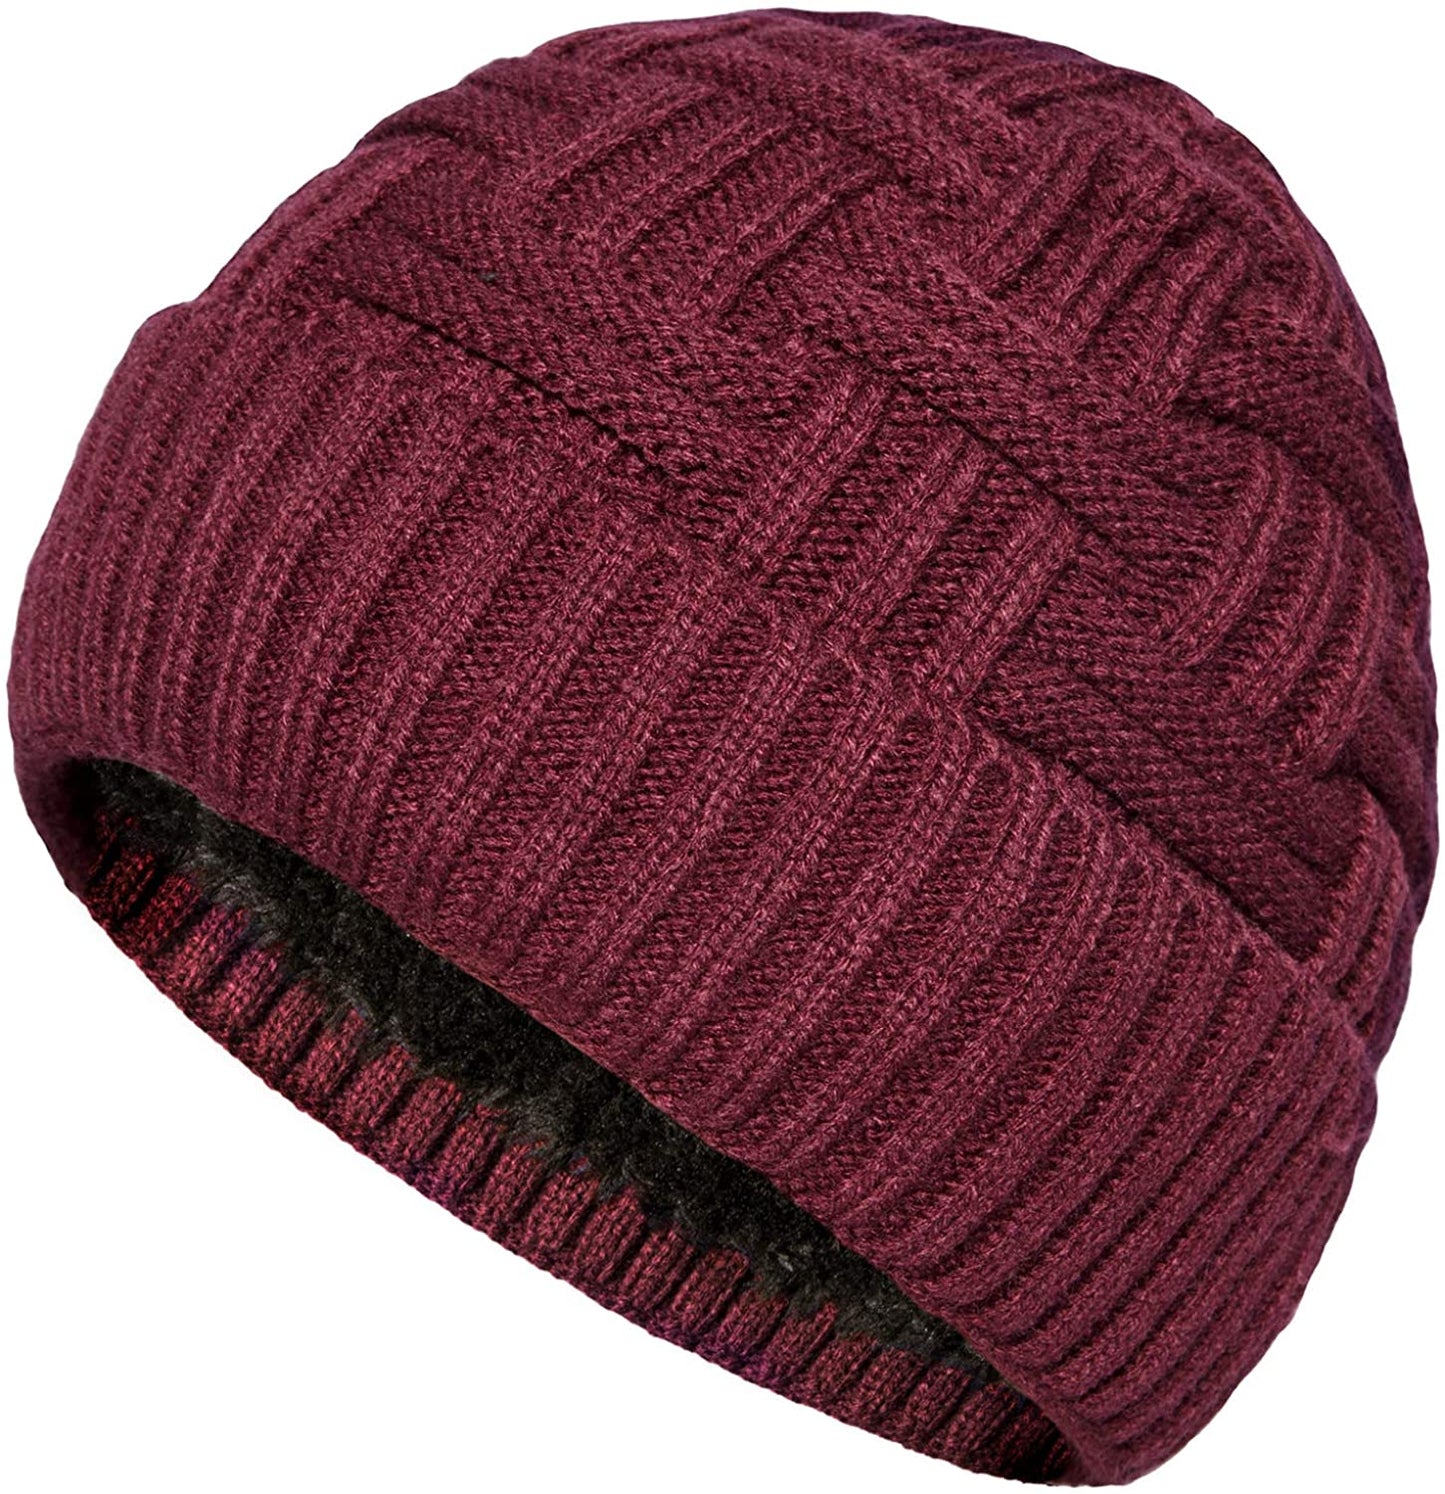 Winter Hat Knitted Wool Thick Baggy Slouchy Beanie Skull Cap